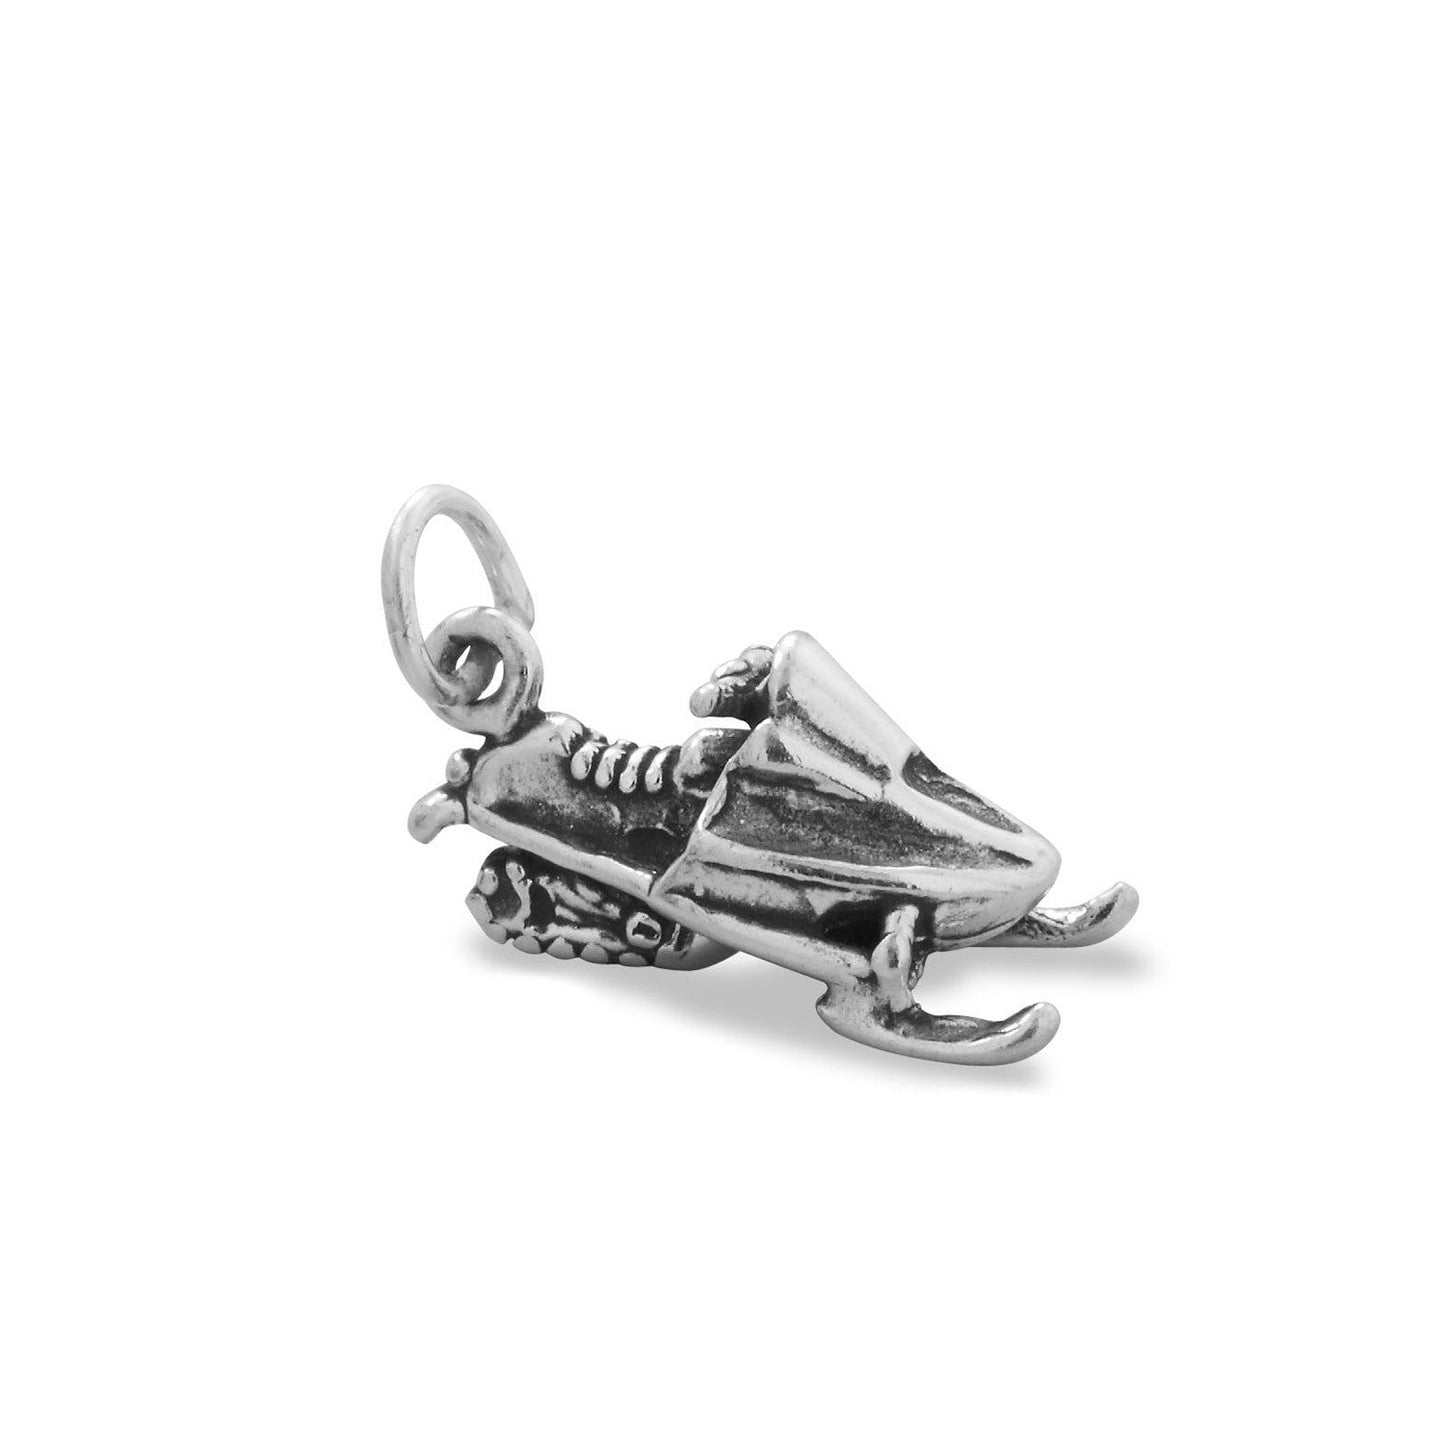 Oxidized Sterling Silver Snowmobile Charm, Made in USA